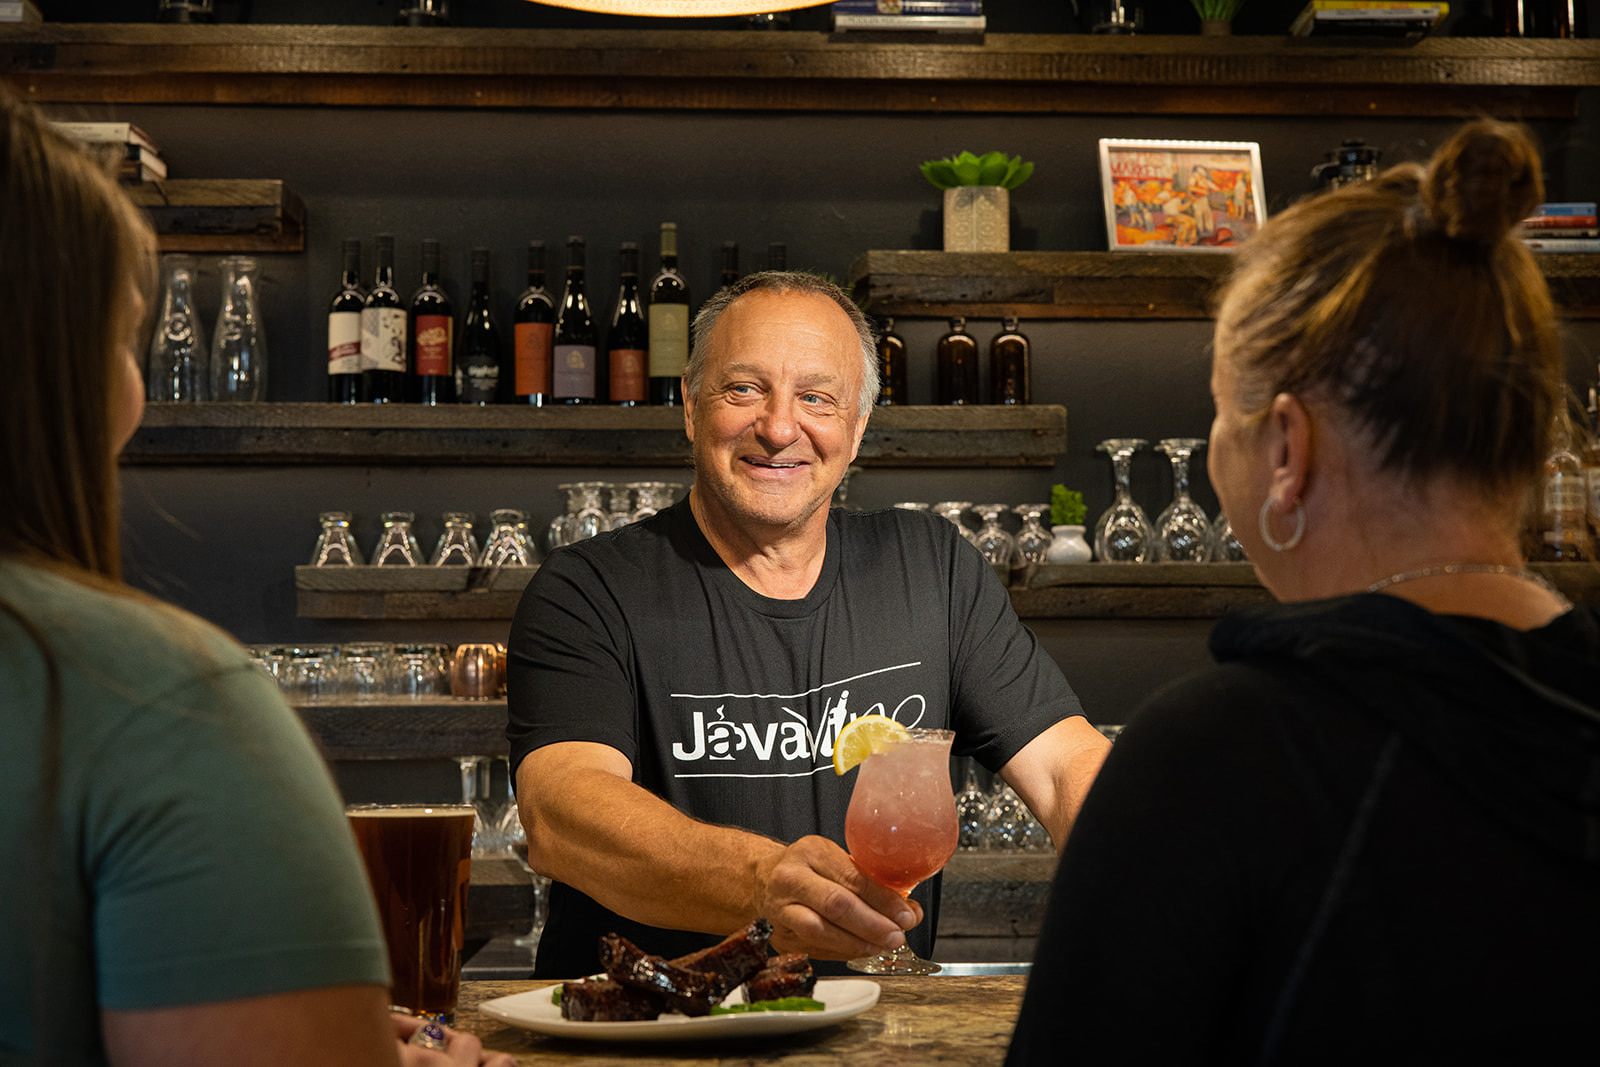 Stylish Professional Portraits at Java Vino by Jeff Wiswell of J.L. Wiswell Photography